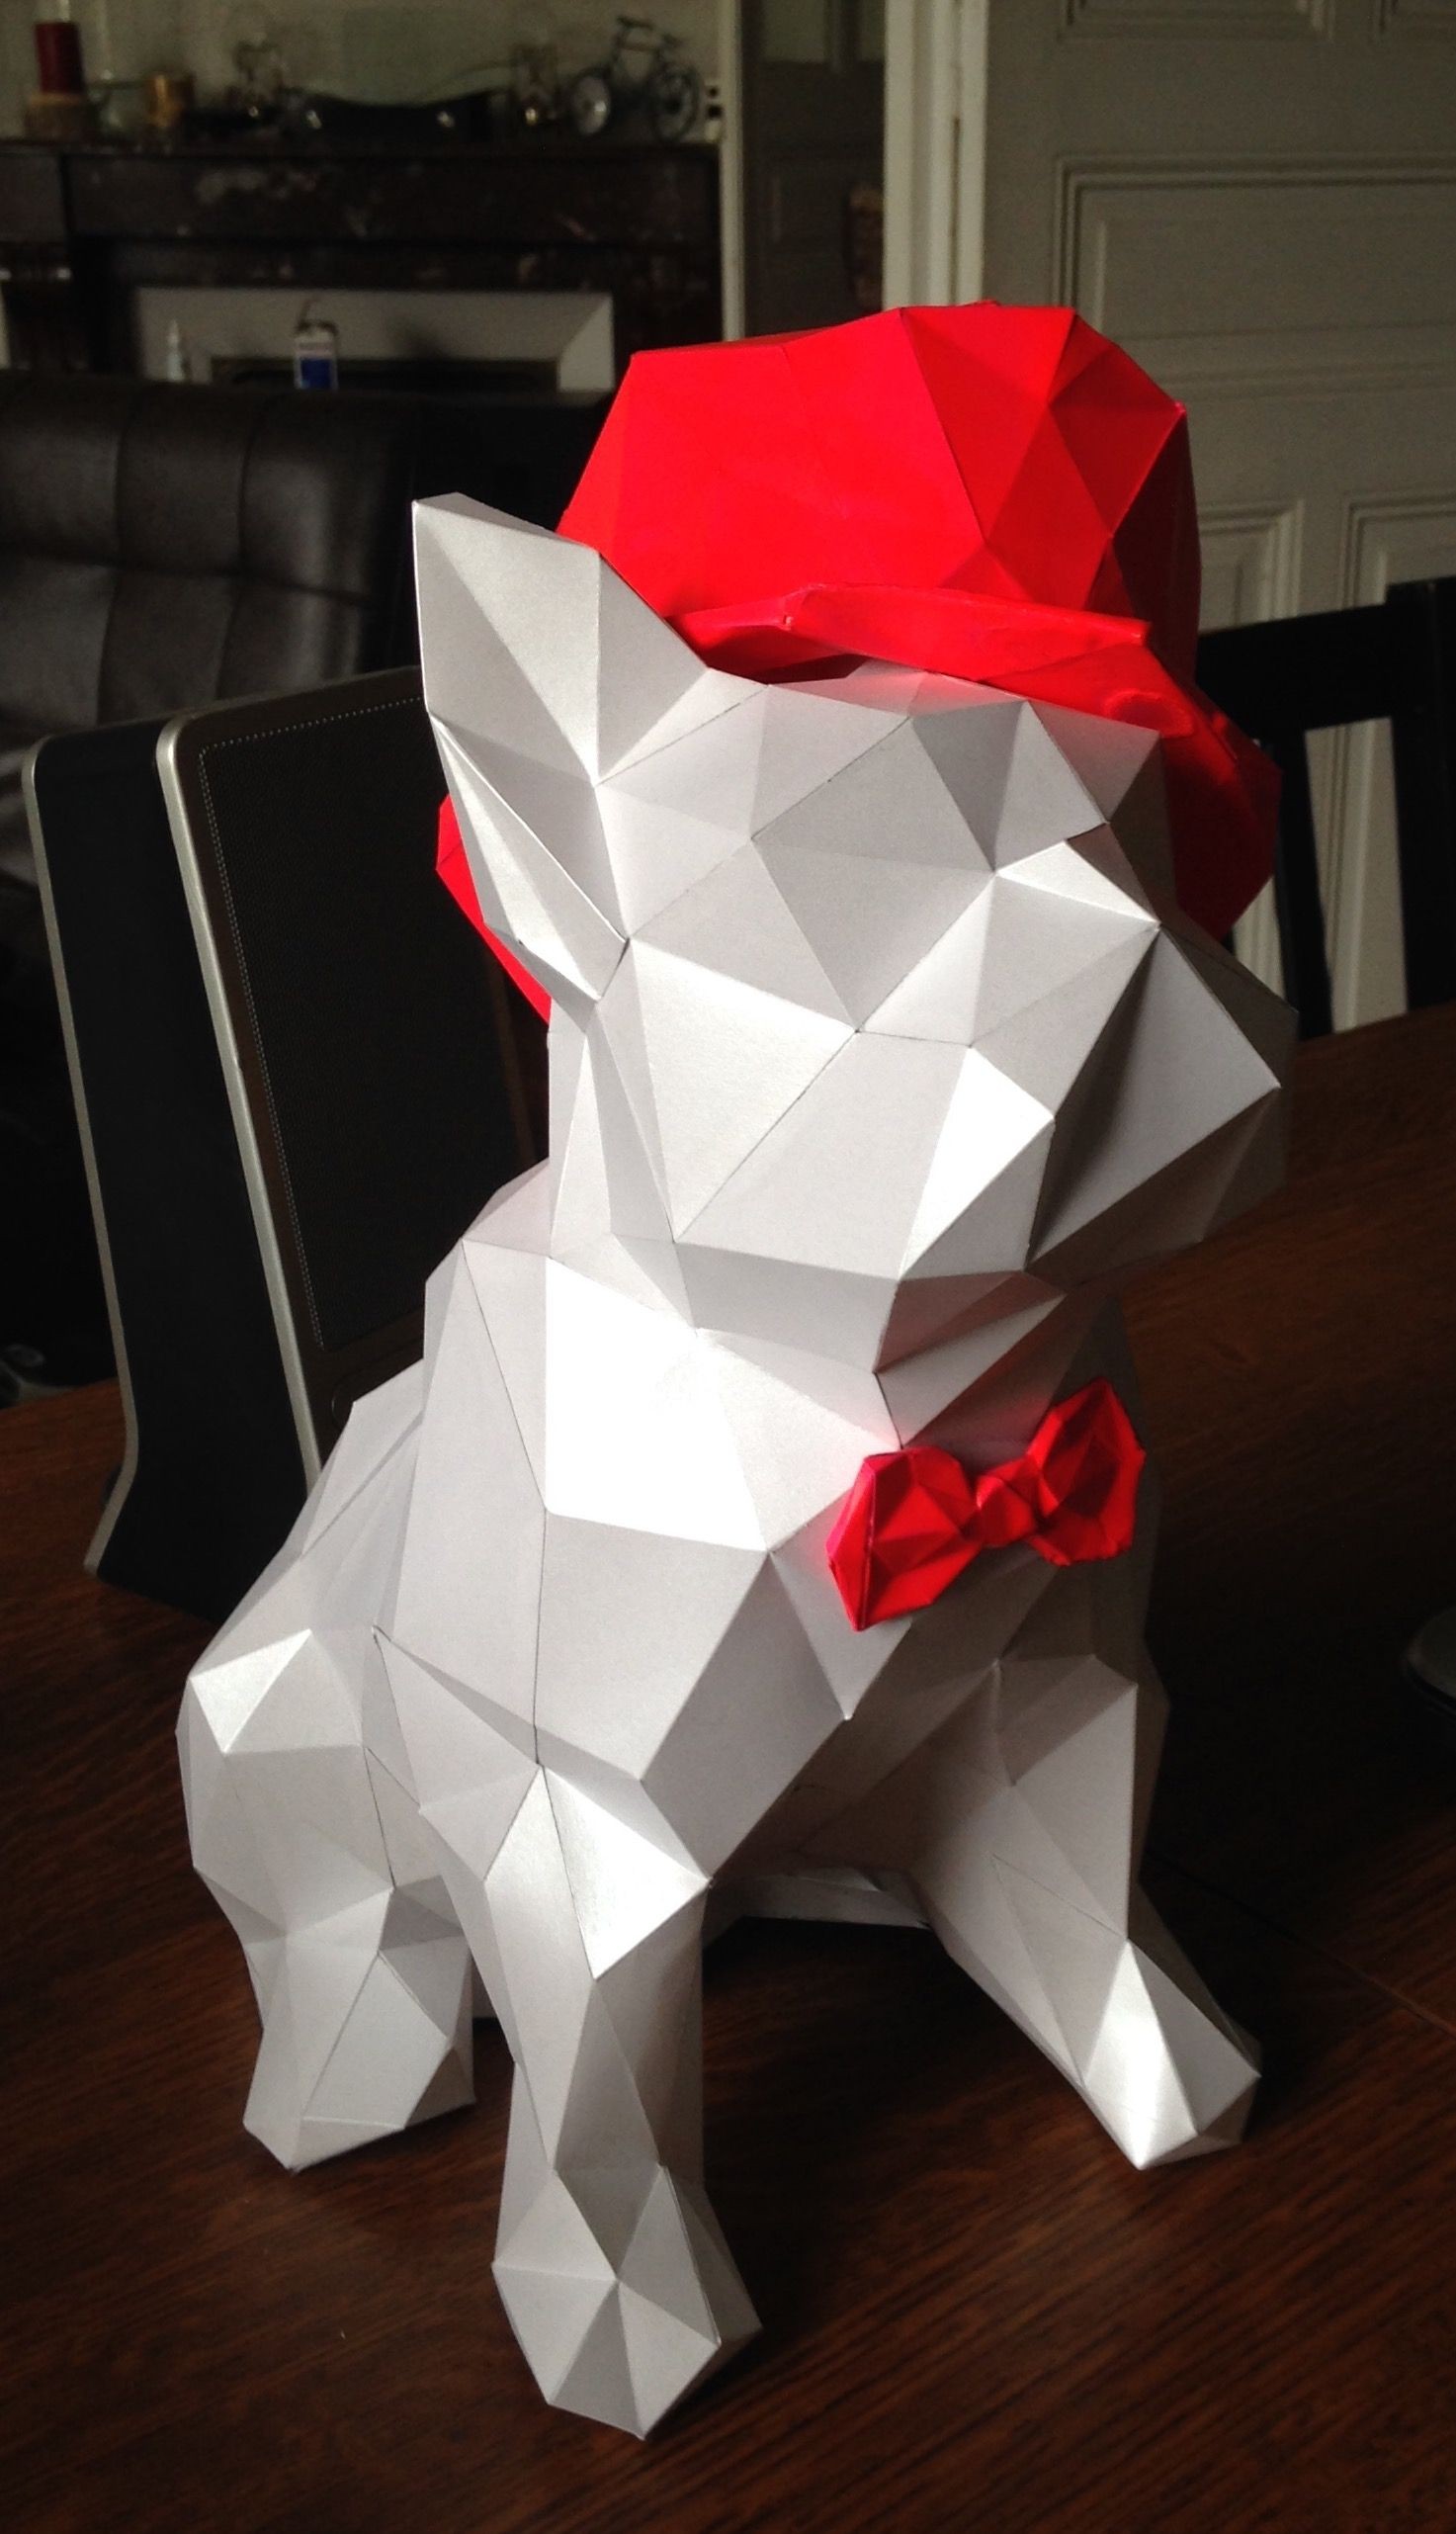 Papercraft Owl Dog Papercraft origami Hat and Bow Tie origami